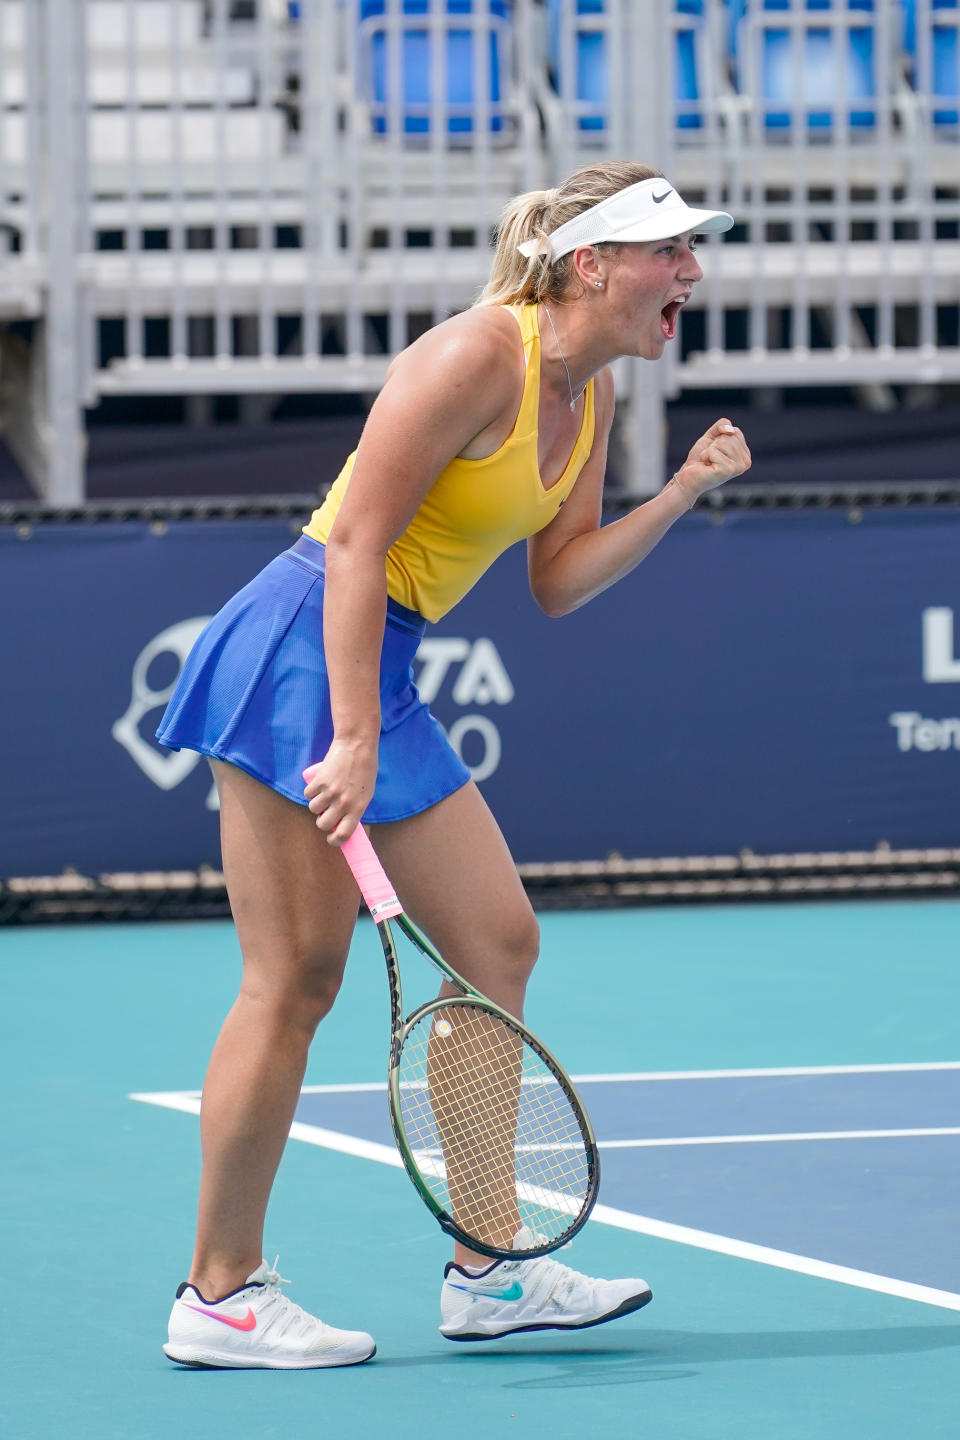 Marta Kostyuk (pictured) hits a shot during qualifying round of the Miami Open.